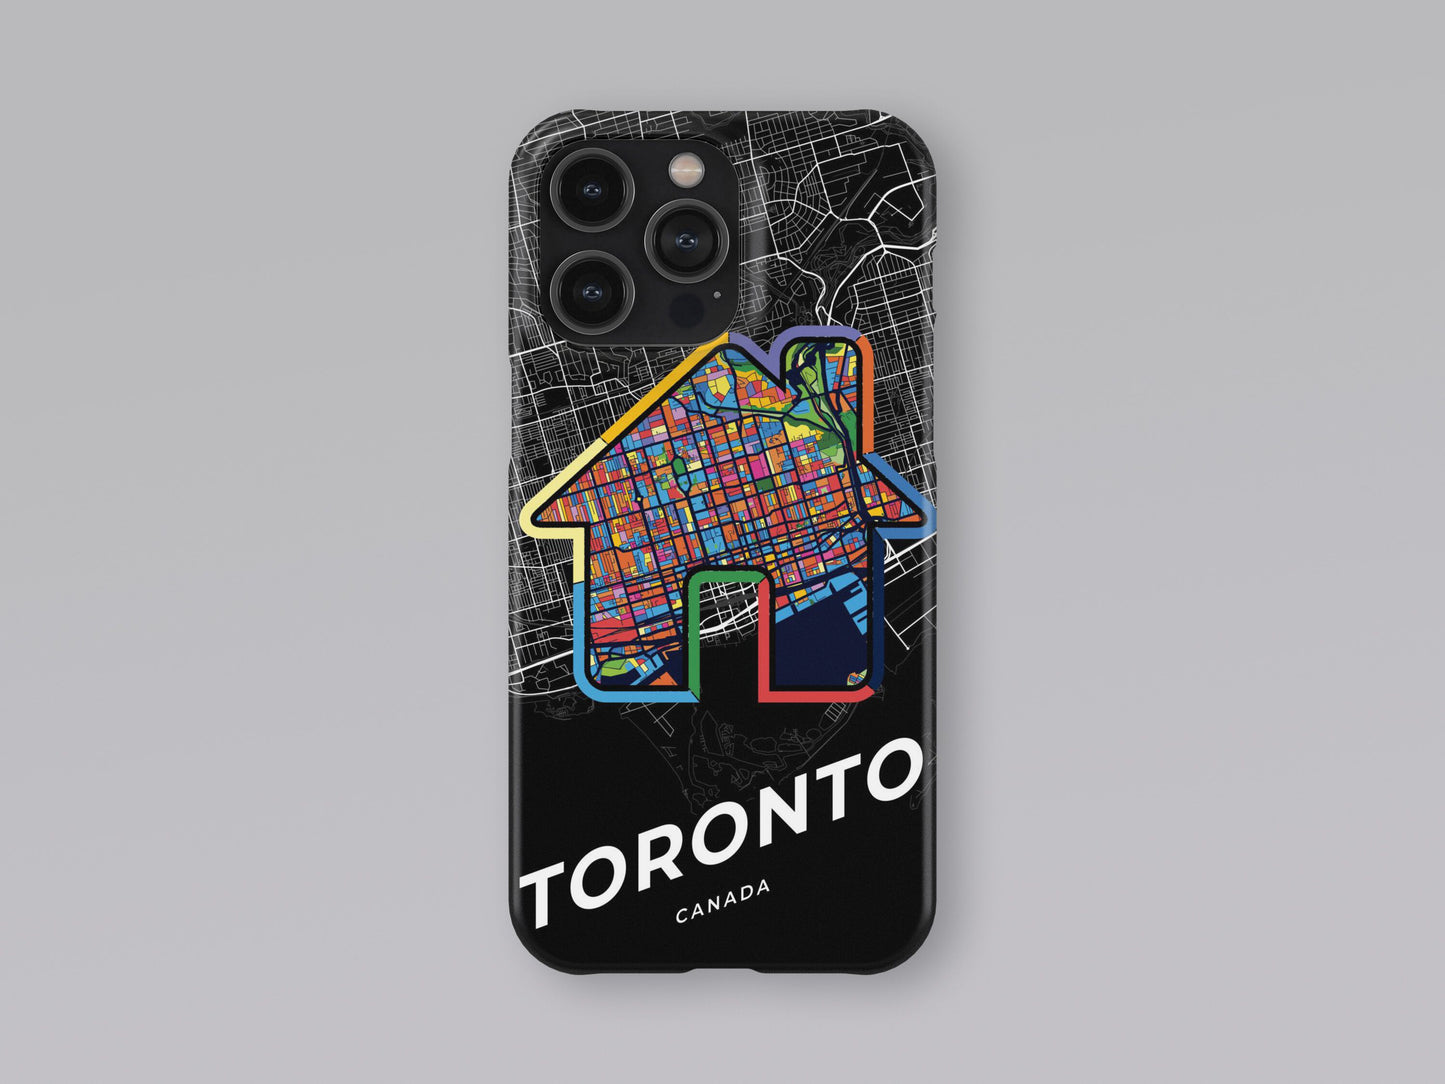 Toronto Canada slim phone case with colorful icon 3